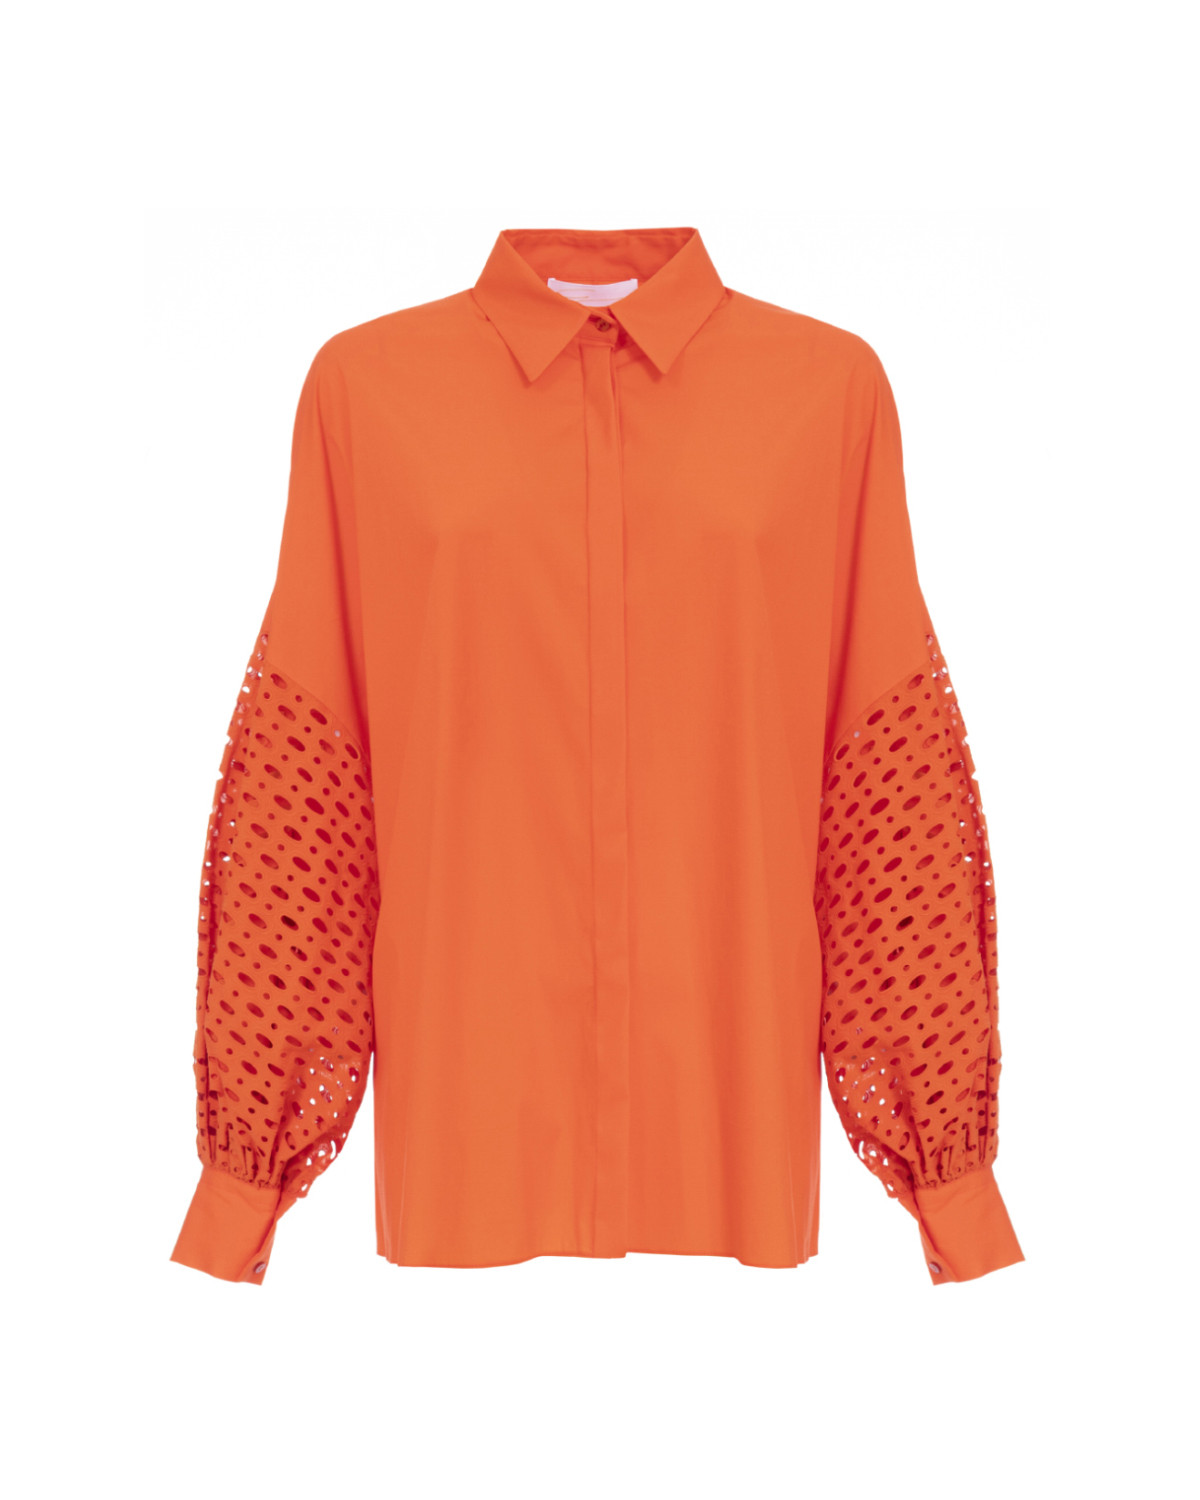 Orange cotton blouse with wide sleeves